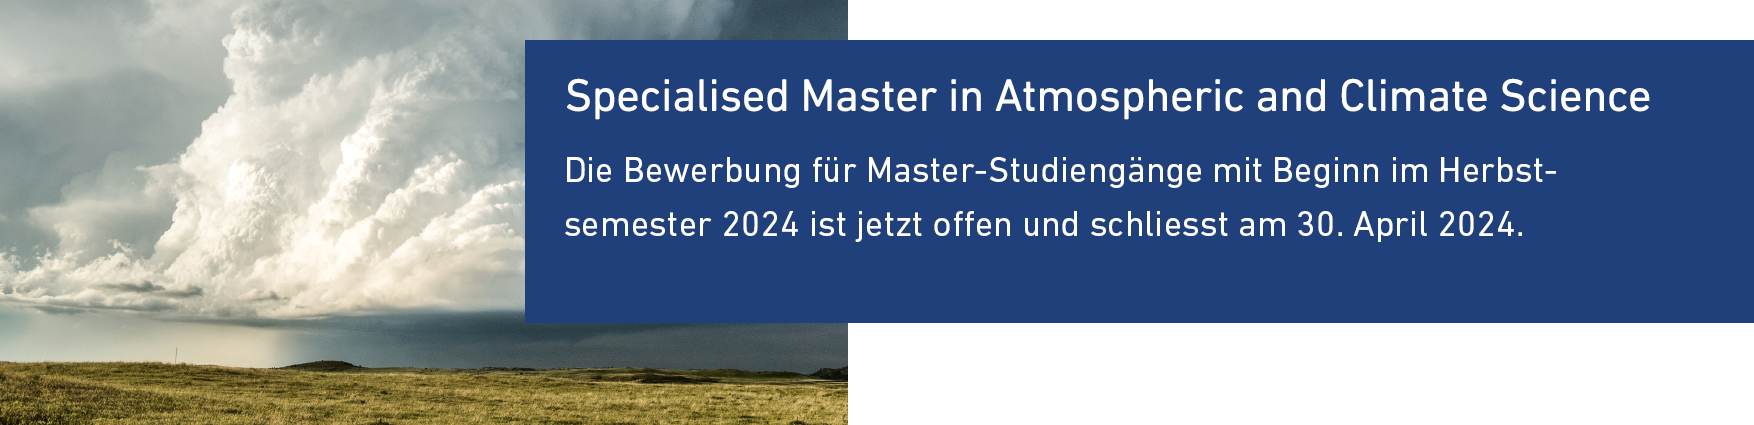 Specialised Master in Atmospheric and Climate Science